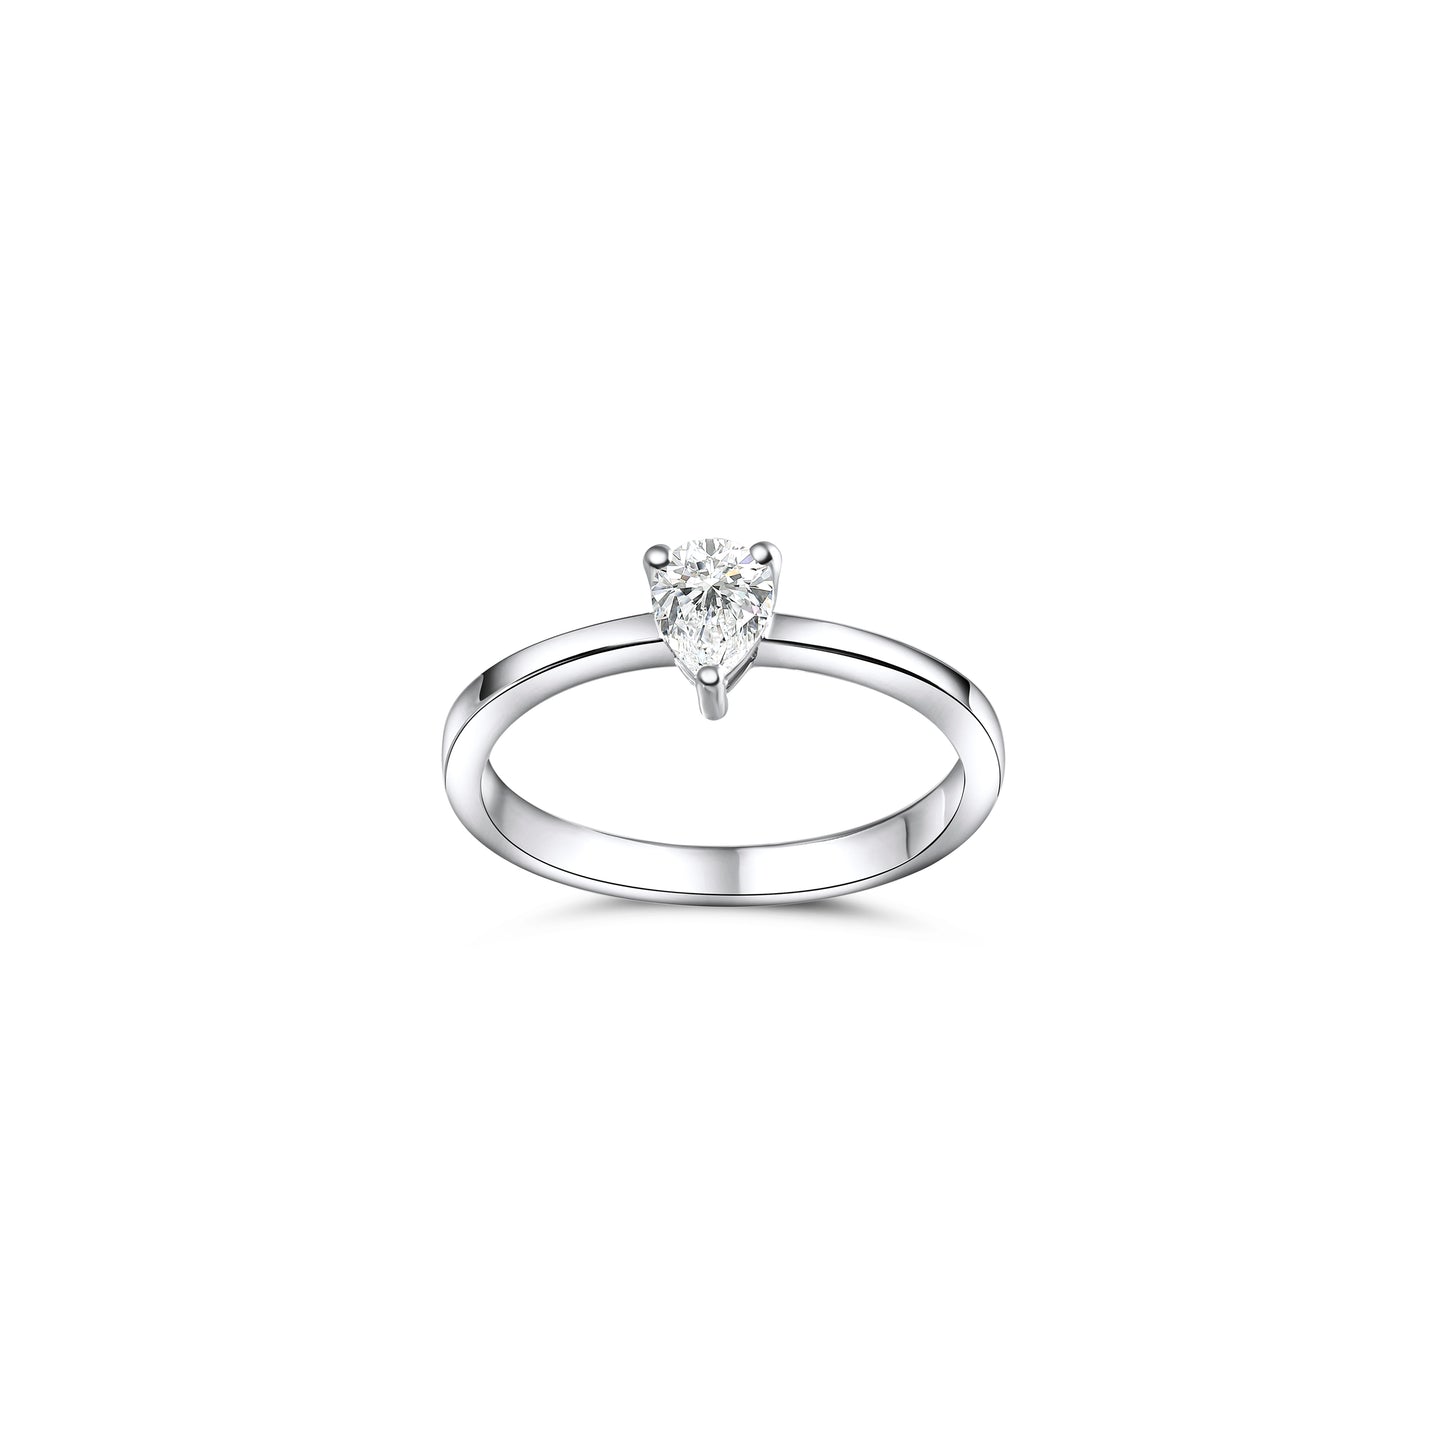 SPARKLING FANCY SOLITAIRE WHITE GOLD RING